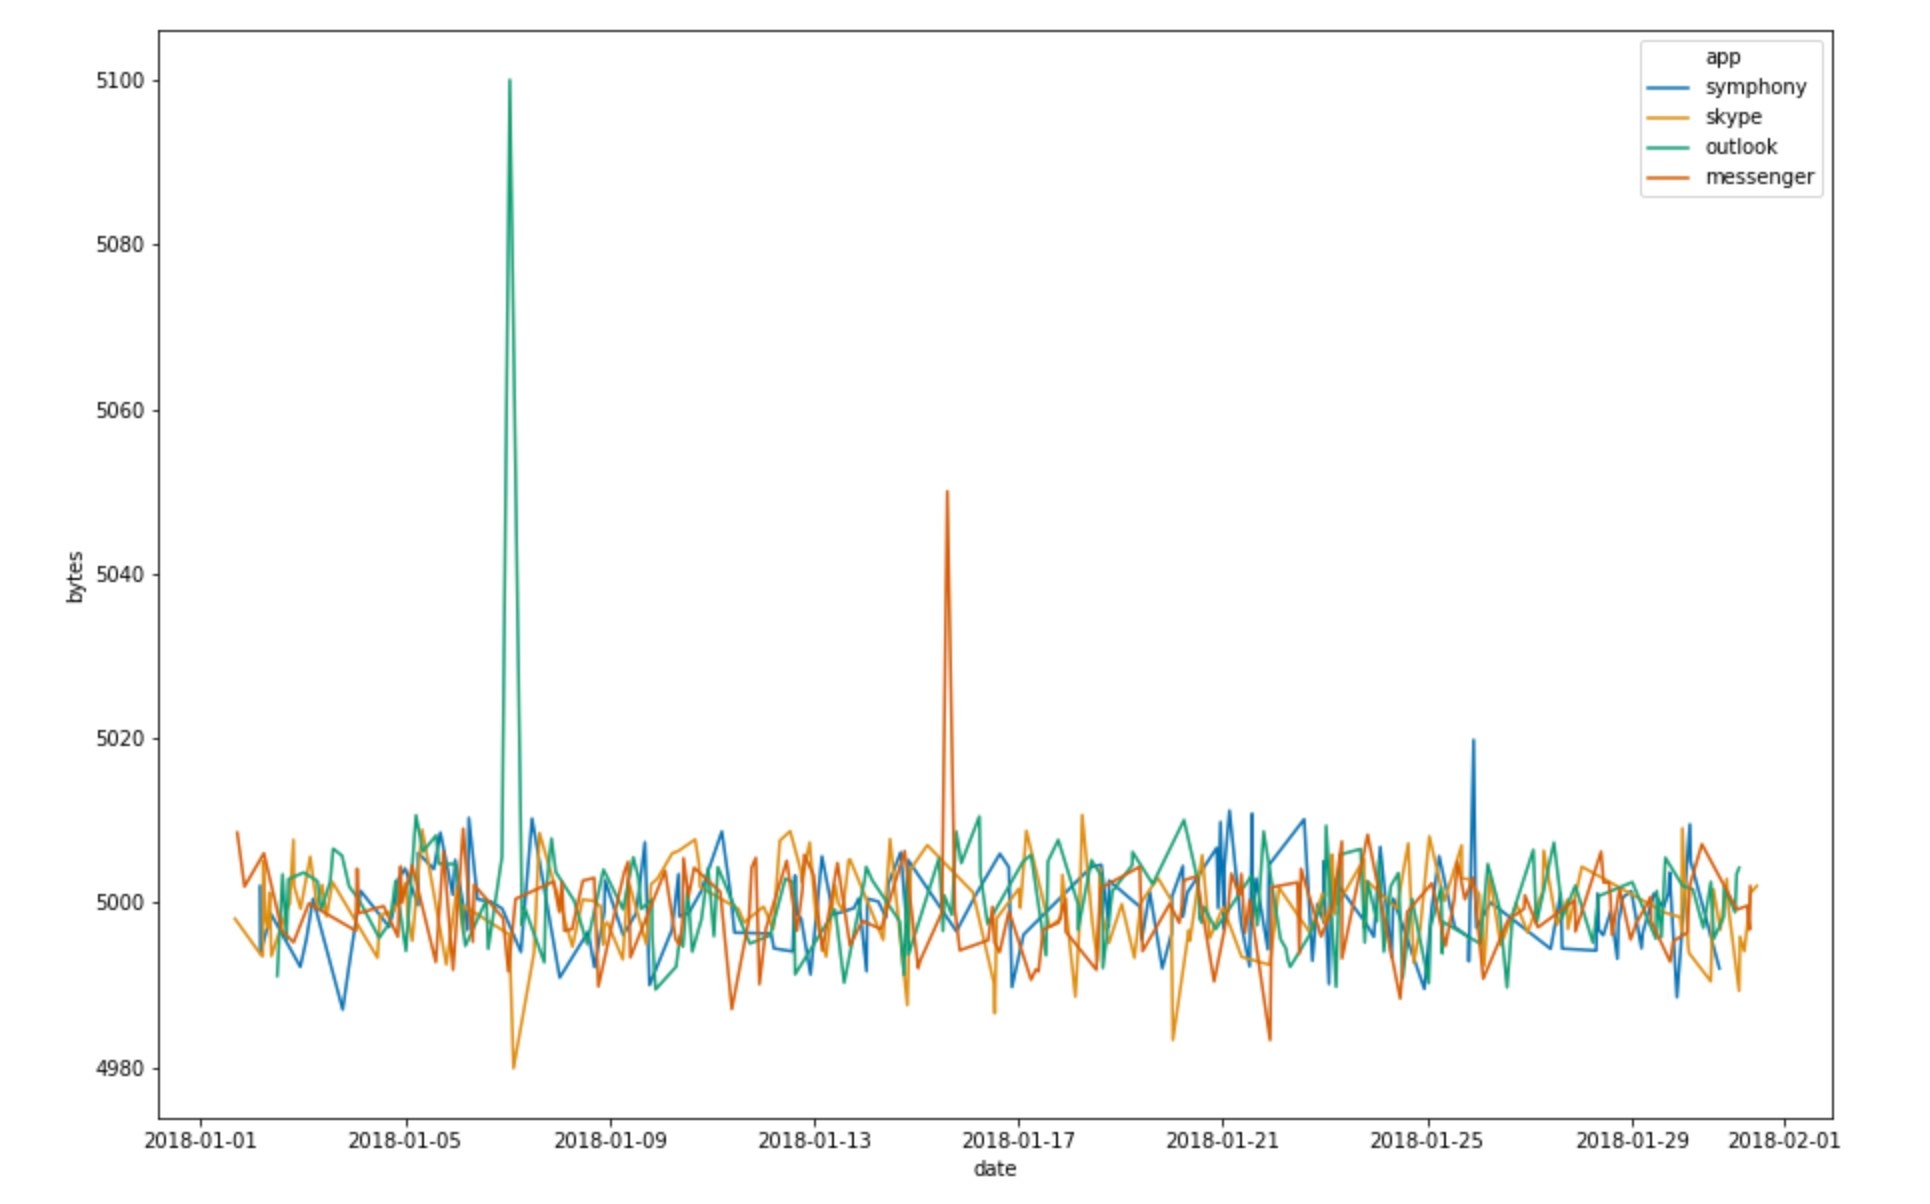 Time series profile of bytes sent by different apps